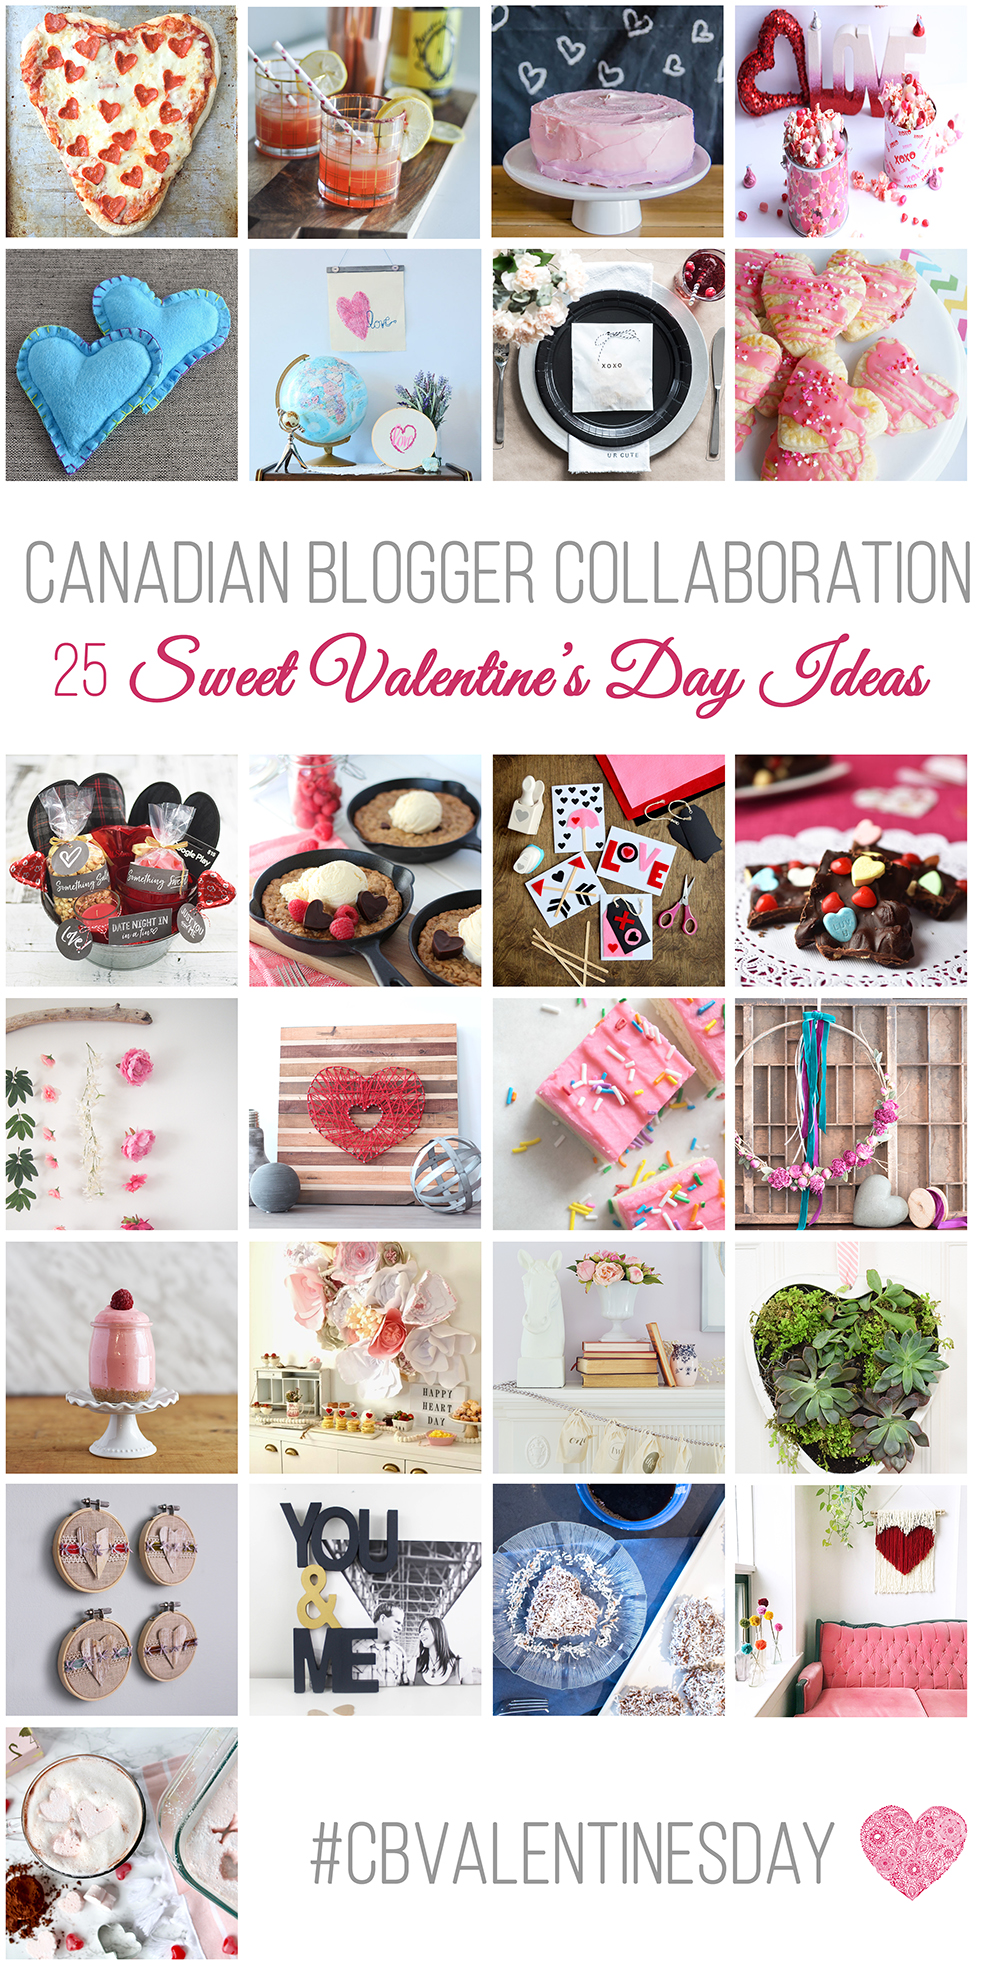 Canadian Blogger Collaboration - 25 Sweet Valentine's Day Ideas